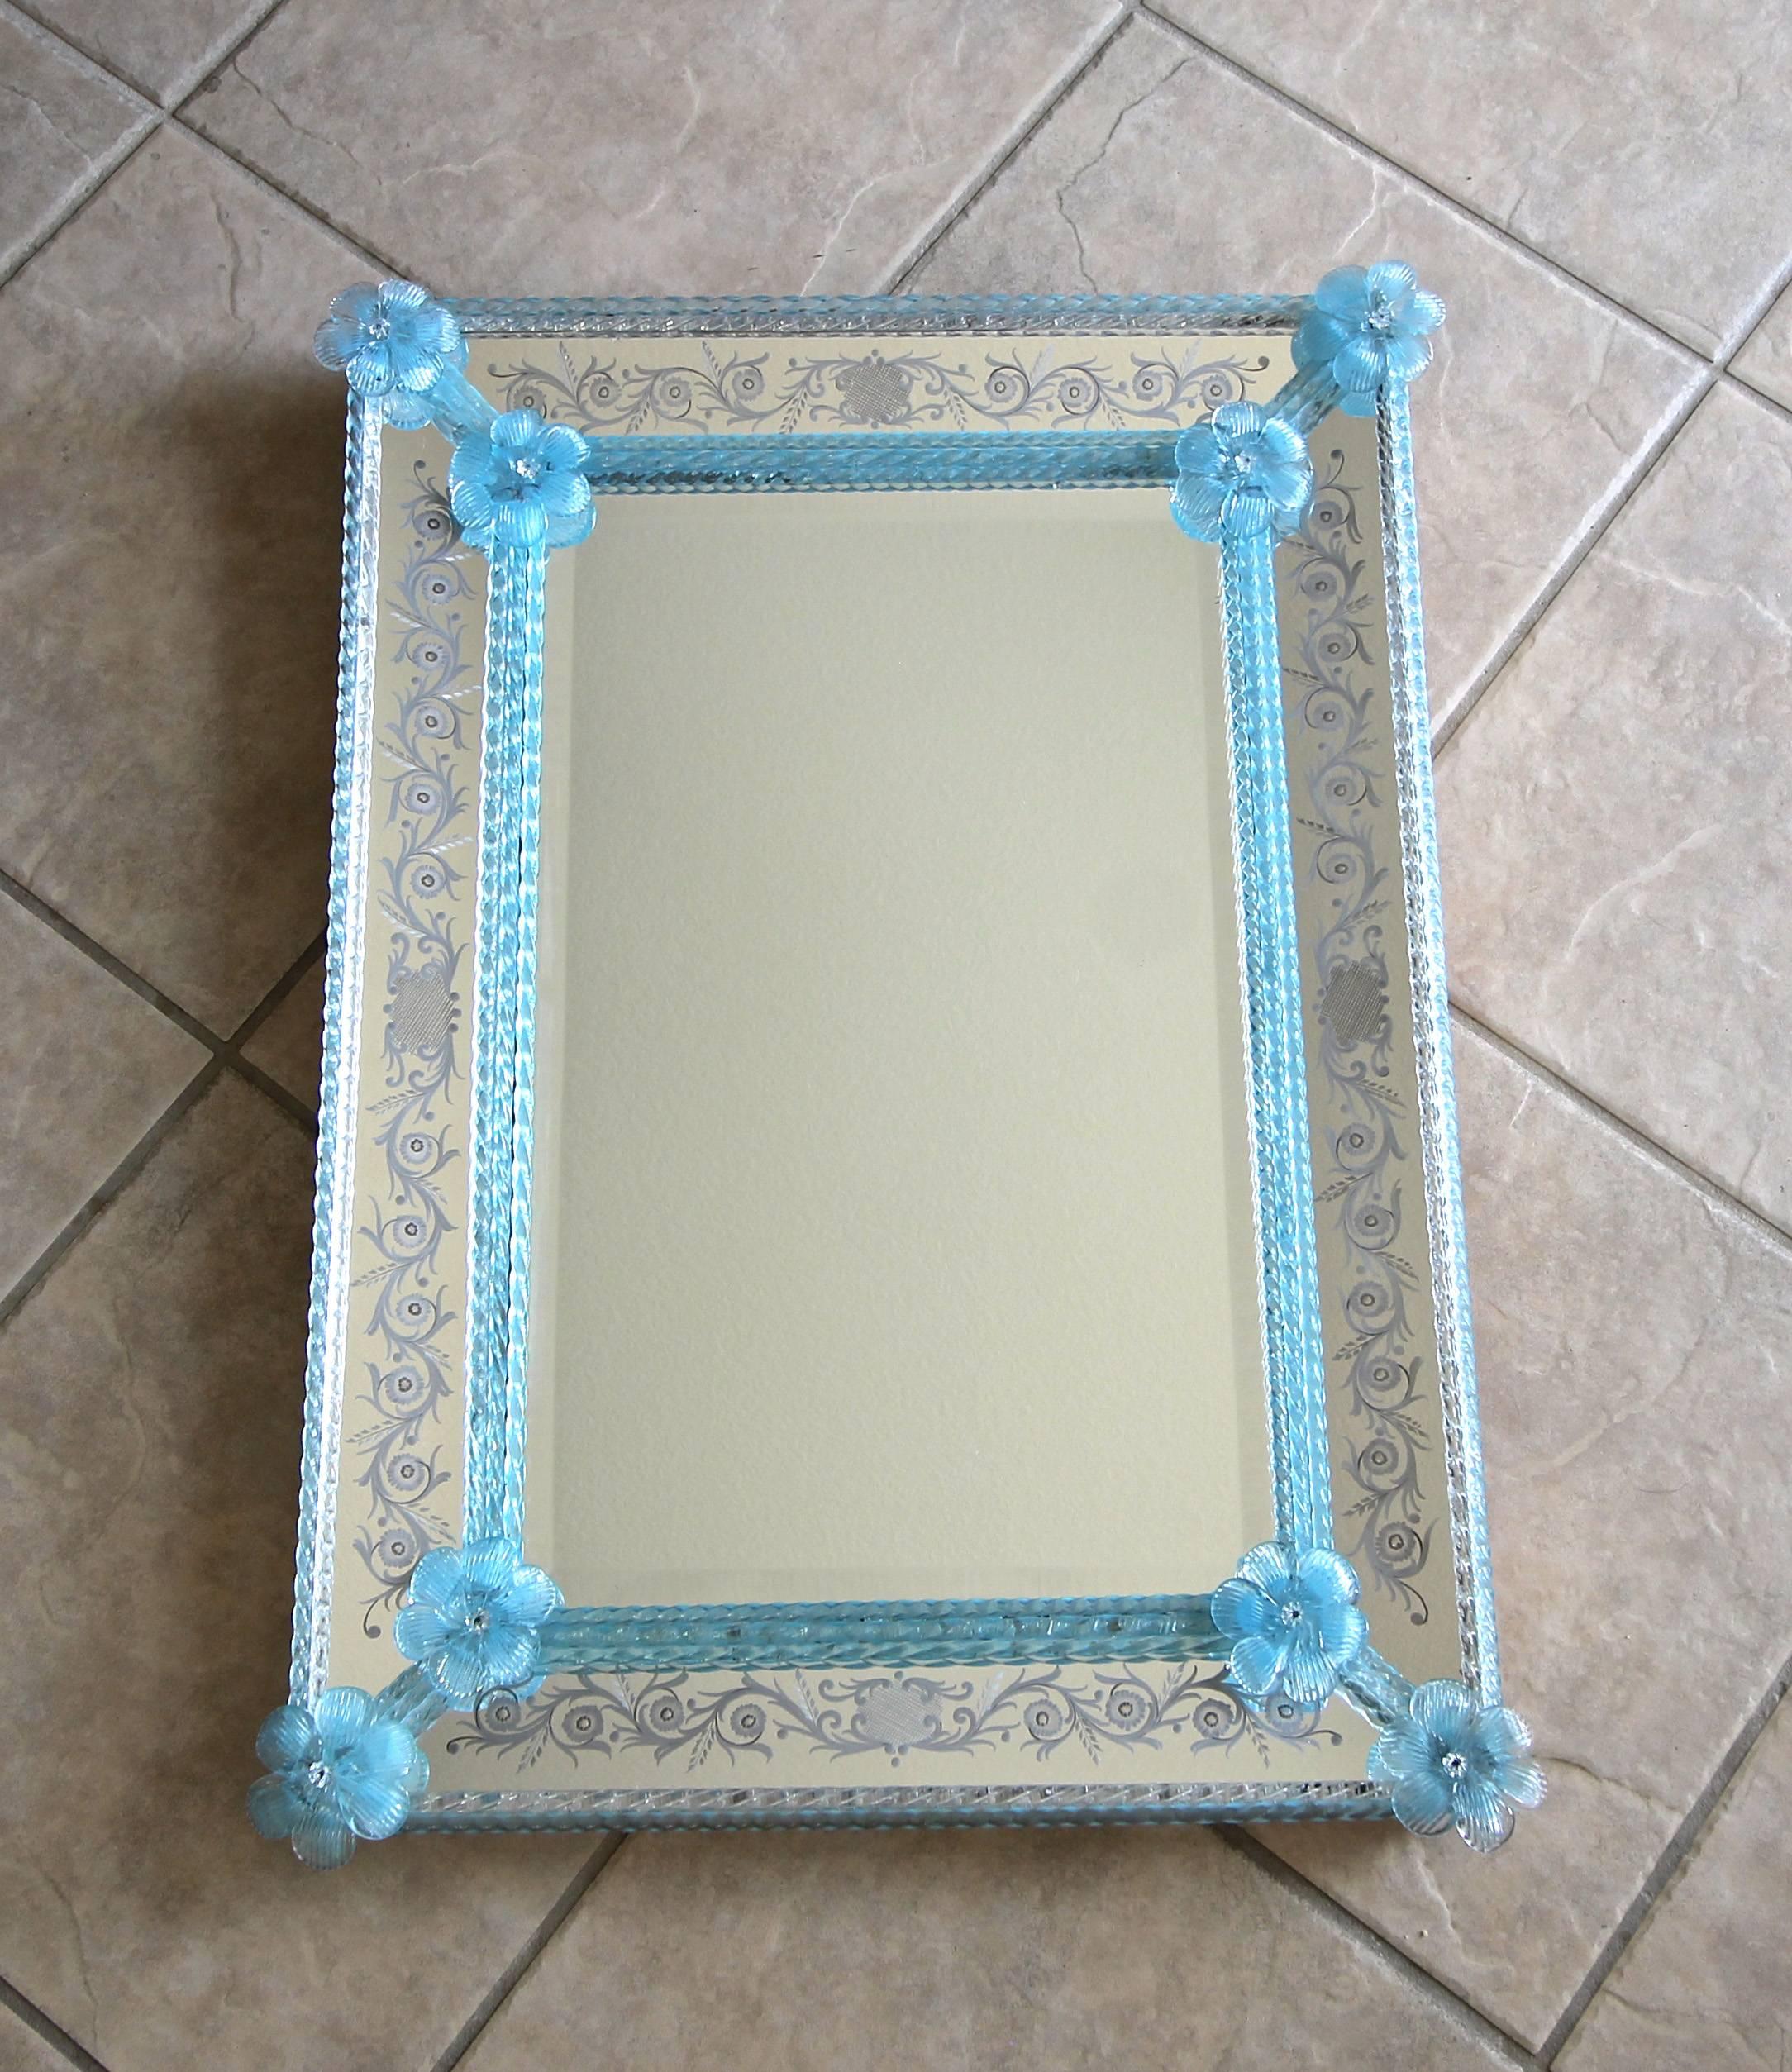 Attractive Italian Venetian bevelled edge mirrored wall mirror with light blue glass flowers and finely twisted rods. Rods are combination of blue and one row of clear rods. Surrounding the mirror is a detailed scroll form reverse etched border.